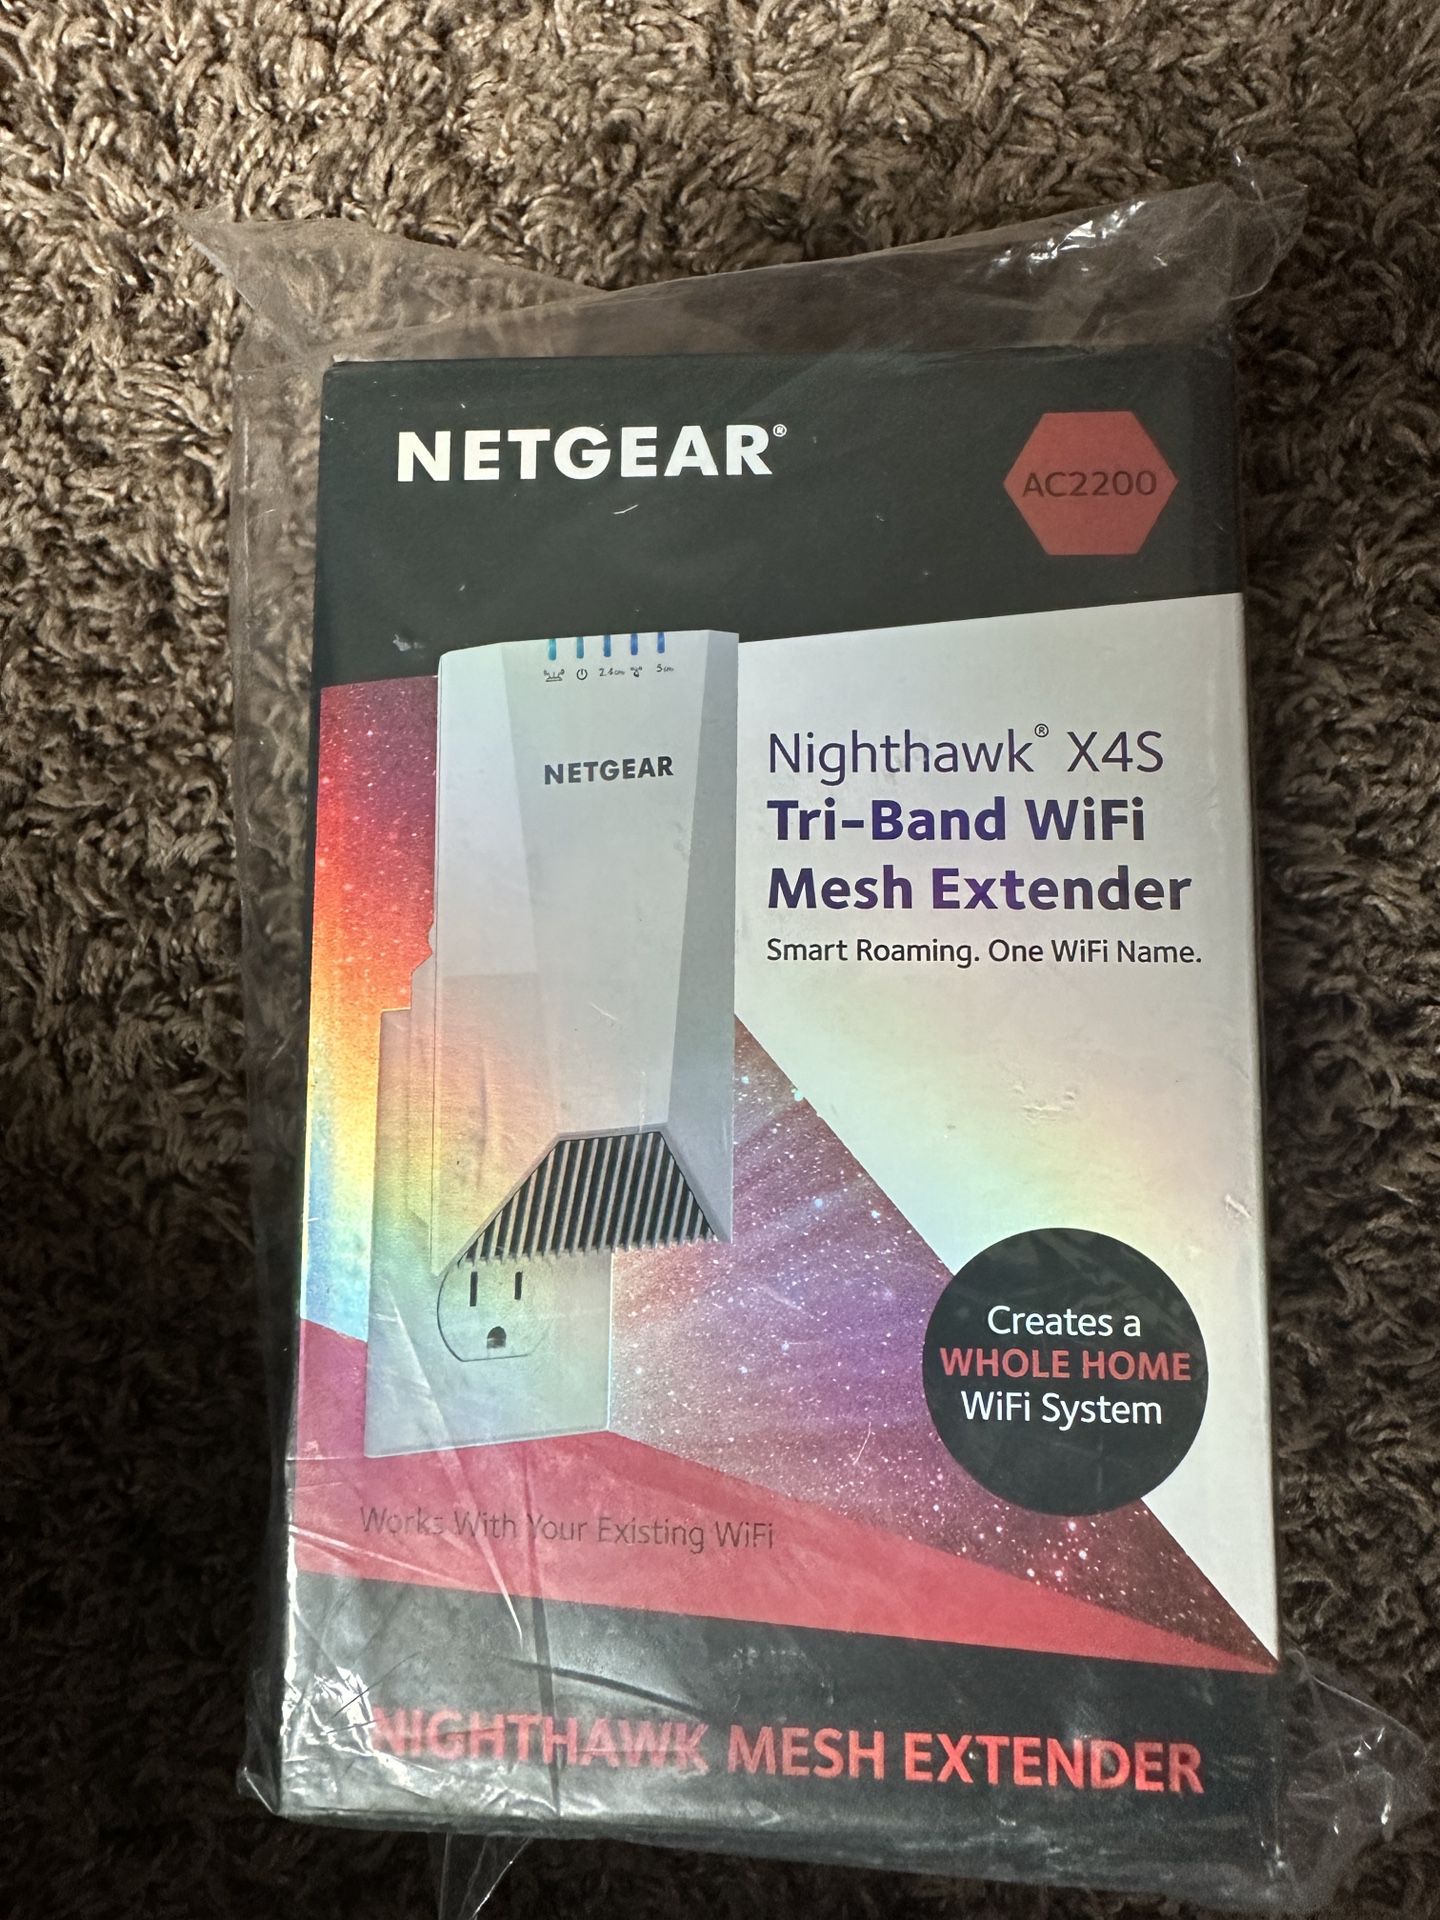 NETGEAR WiFi Mesh Range Extender EX7500 - Coverage up to 2300 sq.ft. and 45 devices with AC2200 Tri-Band Wireless Signal Booster & Repeater (up to 220